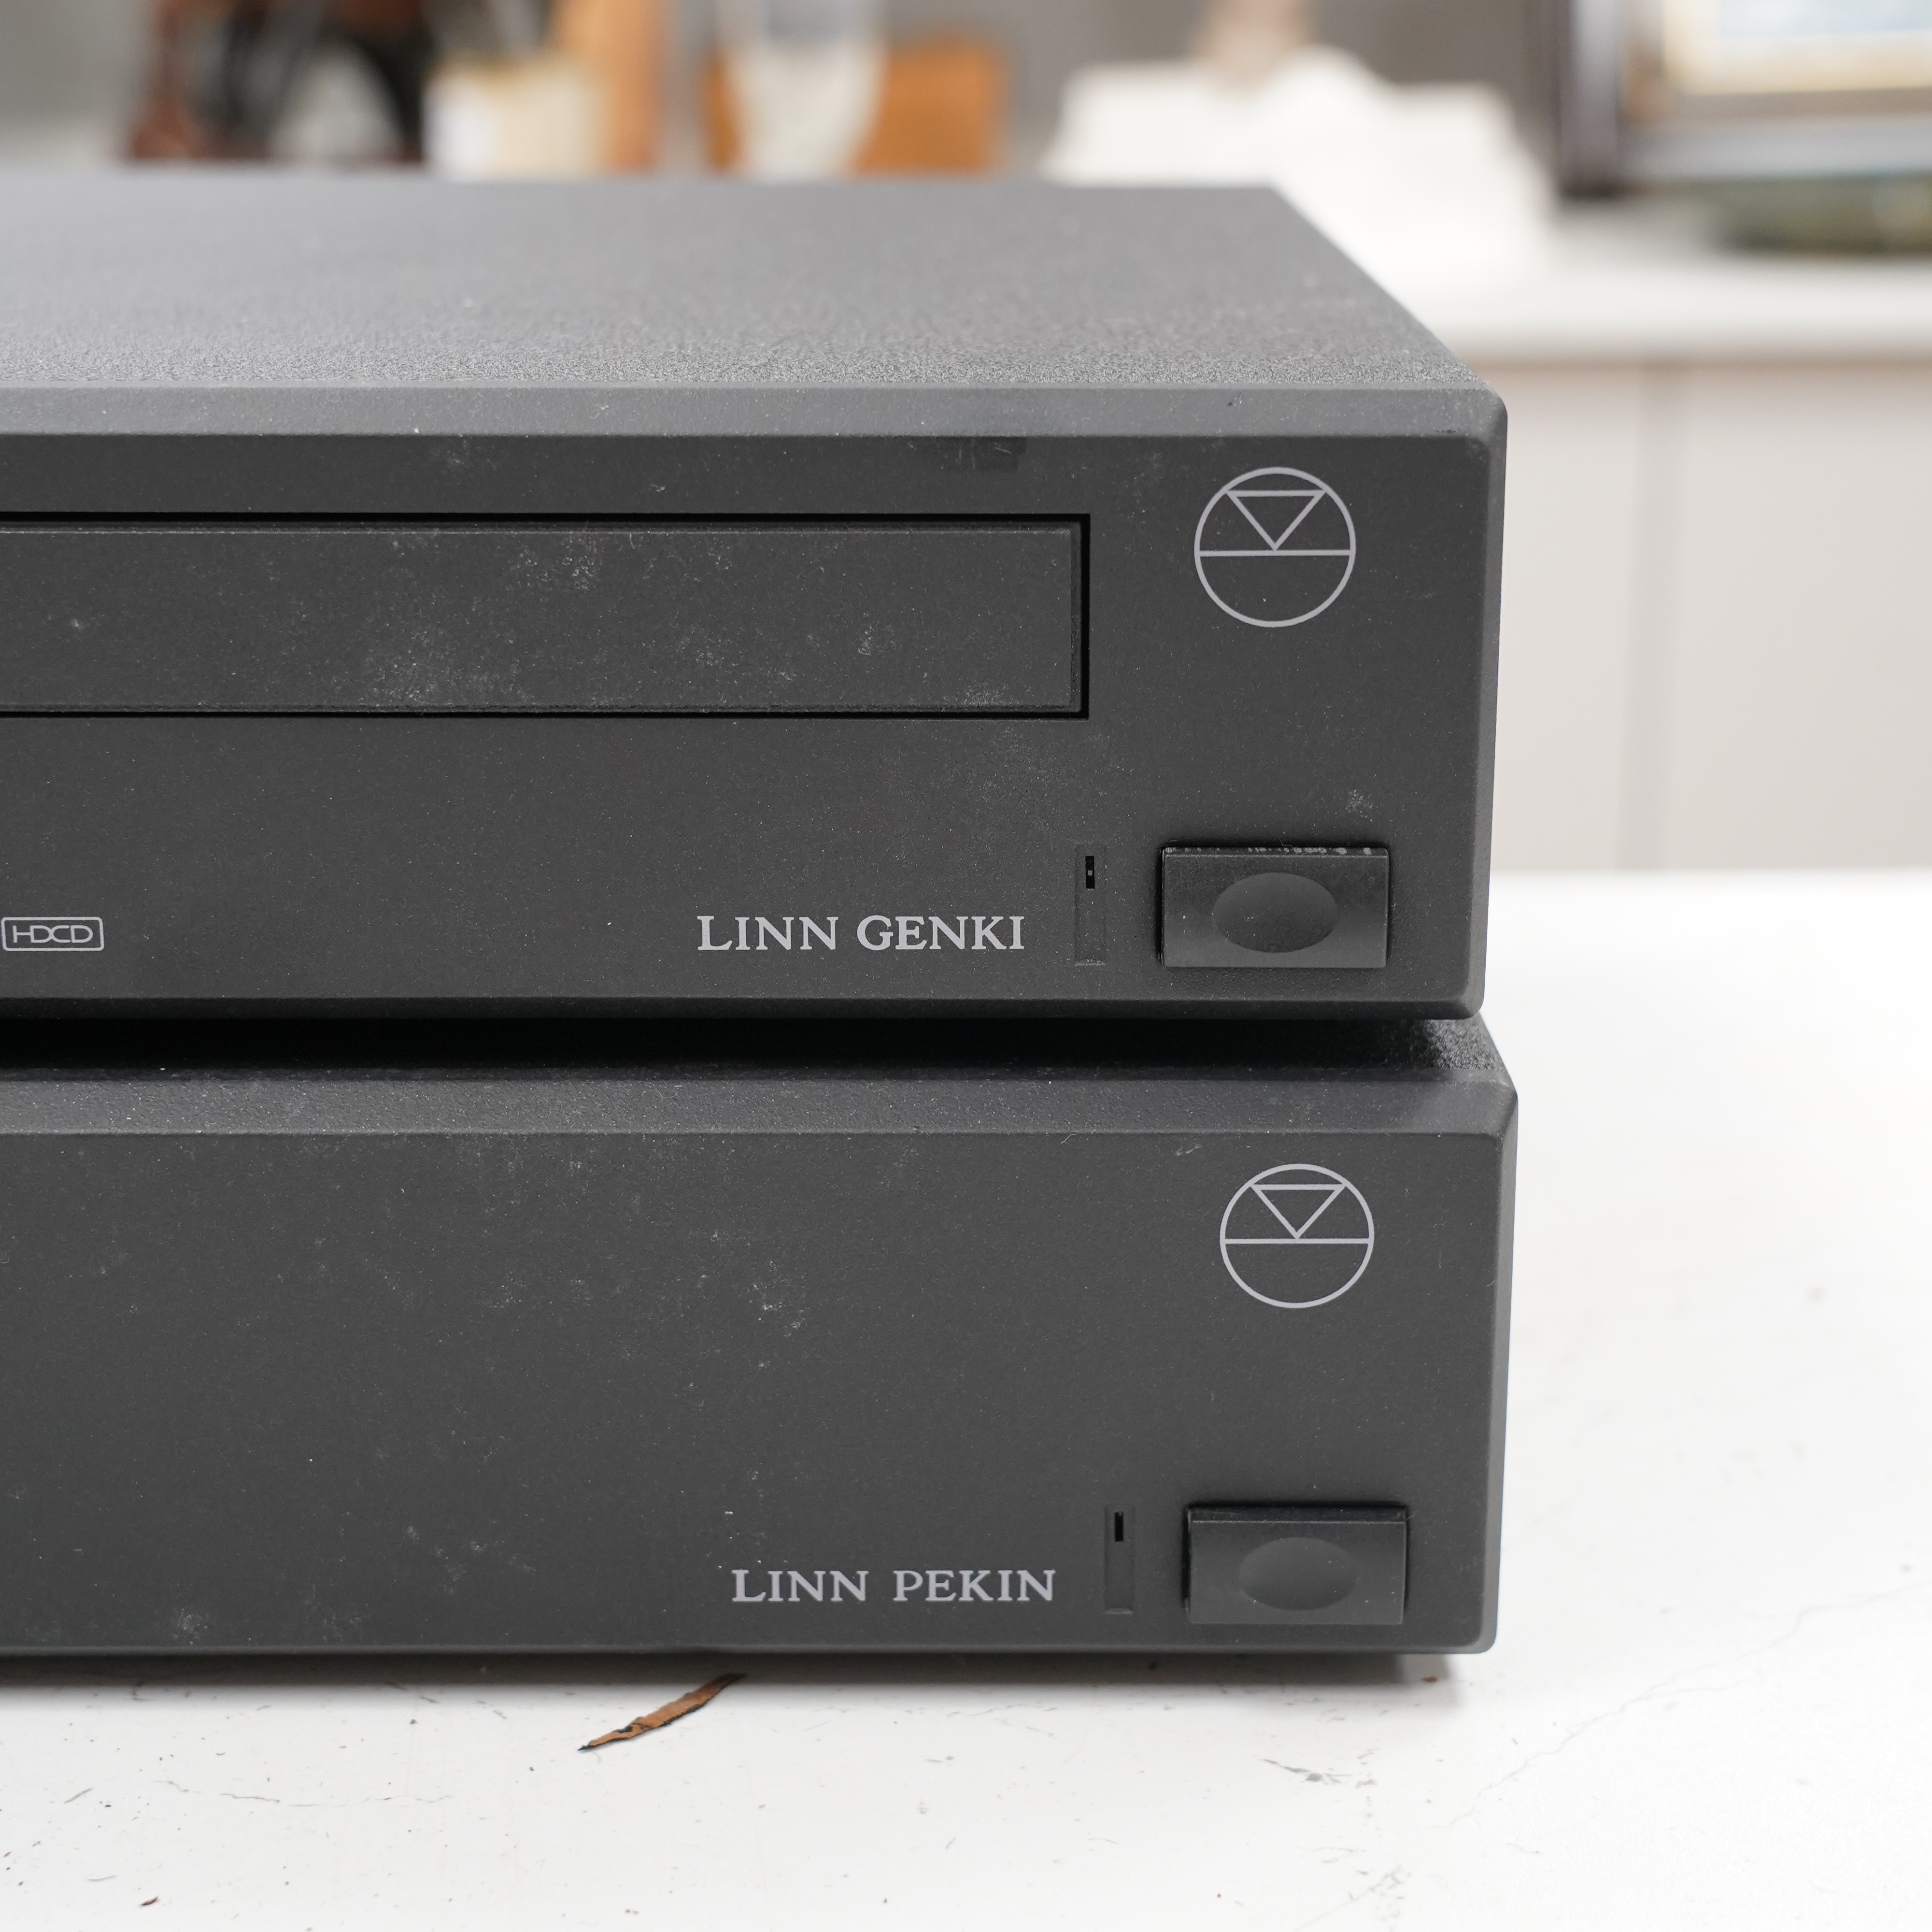 A Linn Pekin tuner, a Linn Genki CD player and three Arcam Alpha 8 Power Amps, with three remote controls, two power cables and instructions for the amplifiers